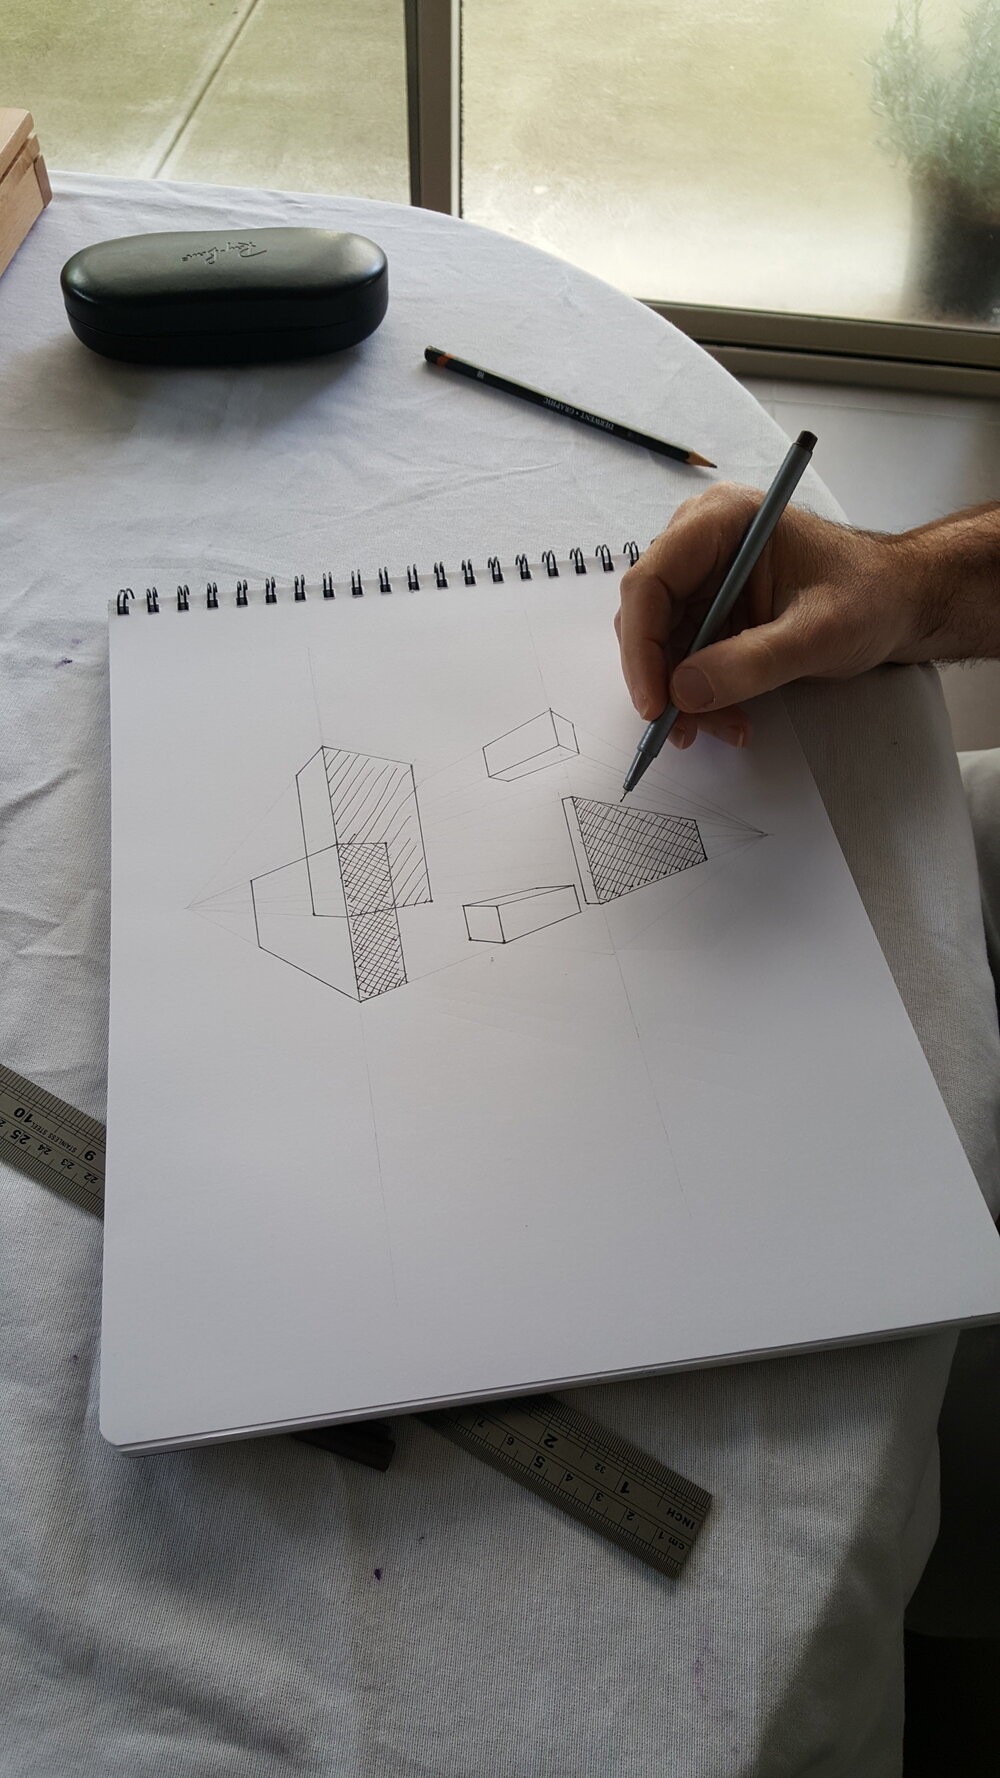 Perspective Drawing